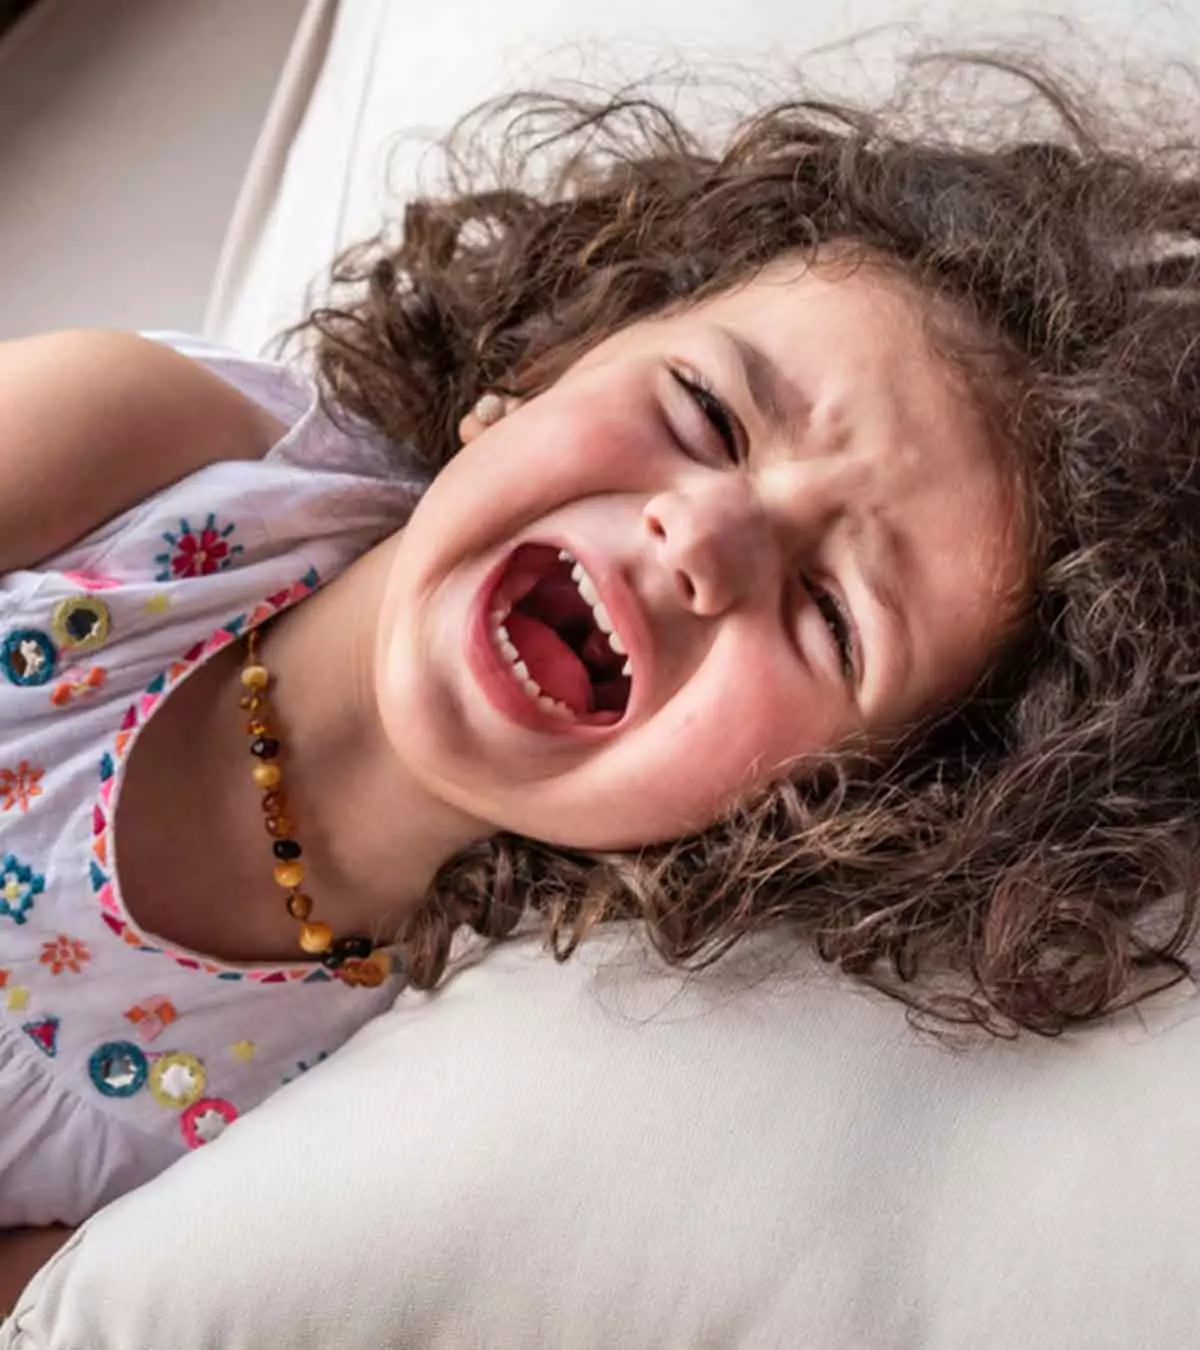 Do We Need To Be More Tolerant Of Children’s Mood Swings